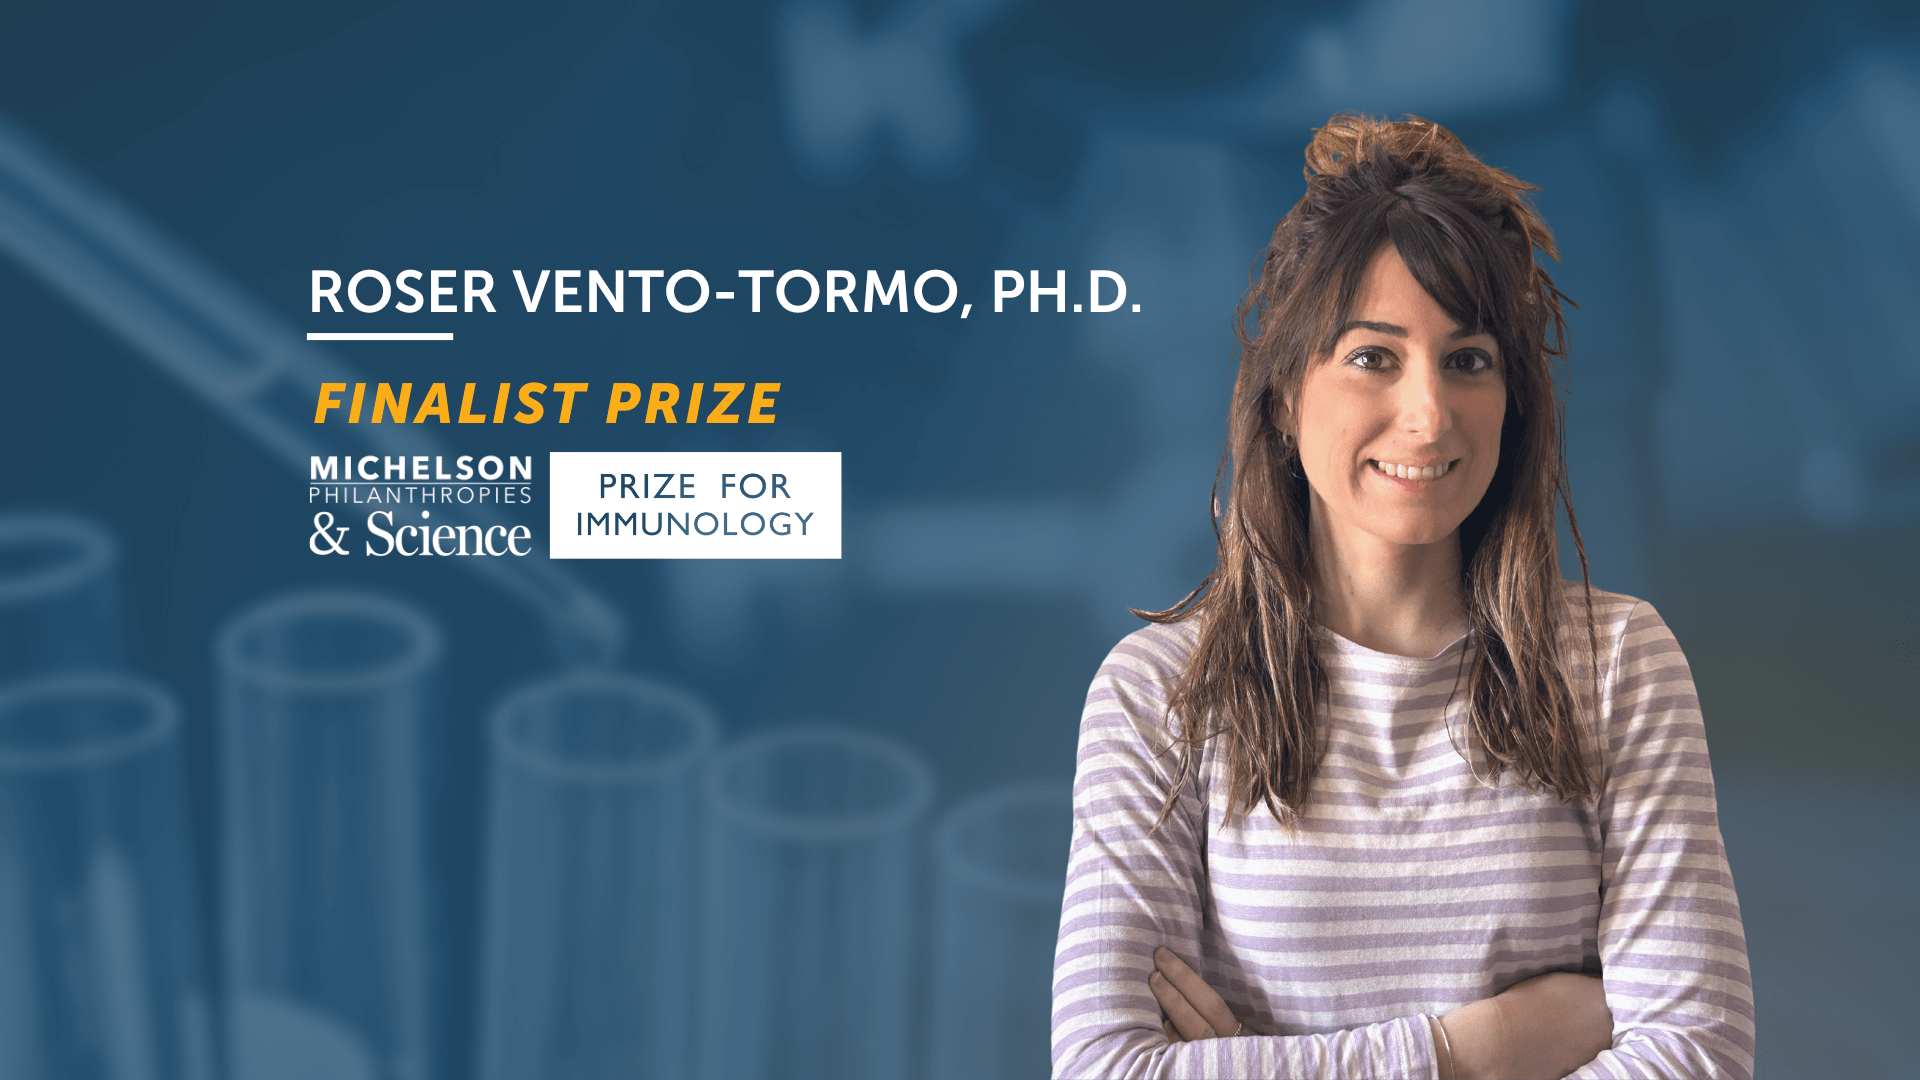 Dr. Roser Vento-Tormo, Michelson Prizes laureate